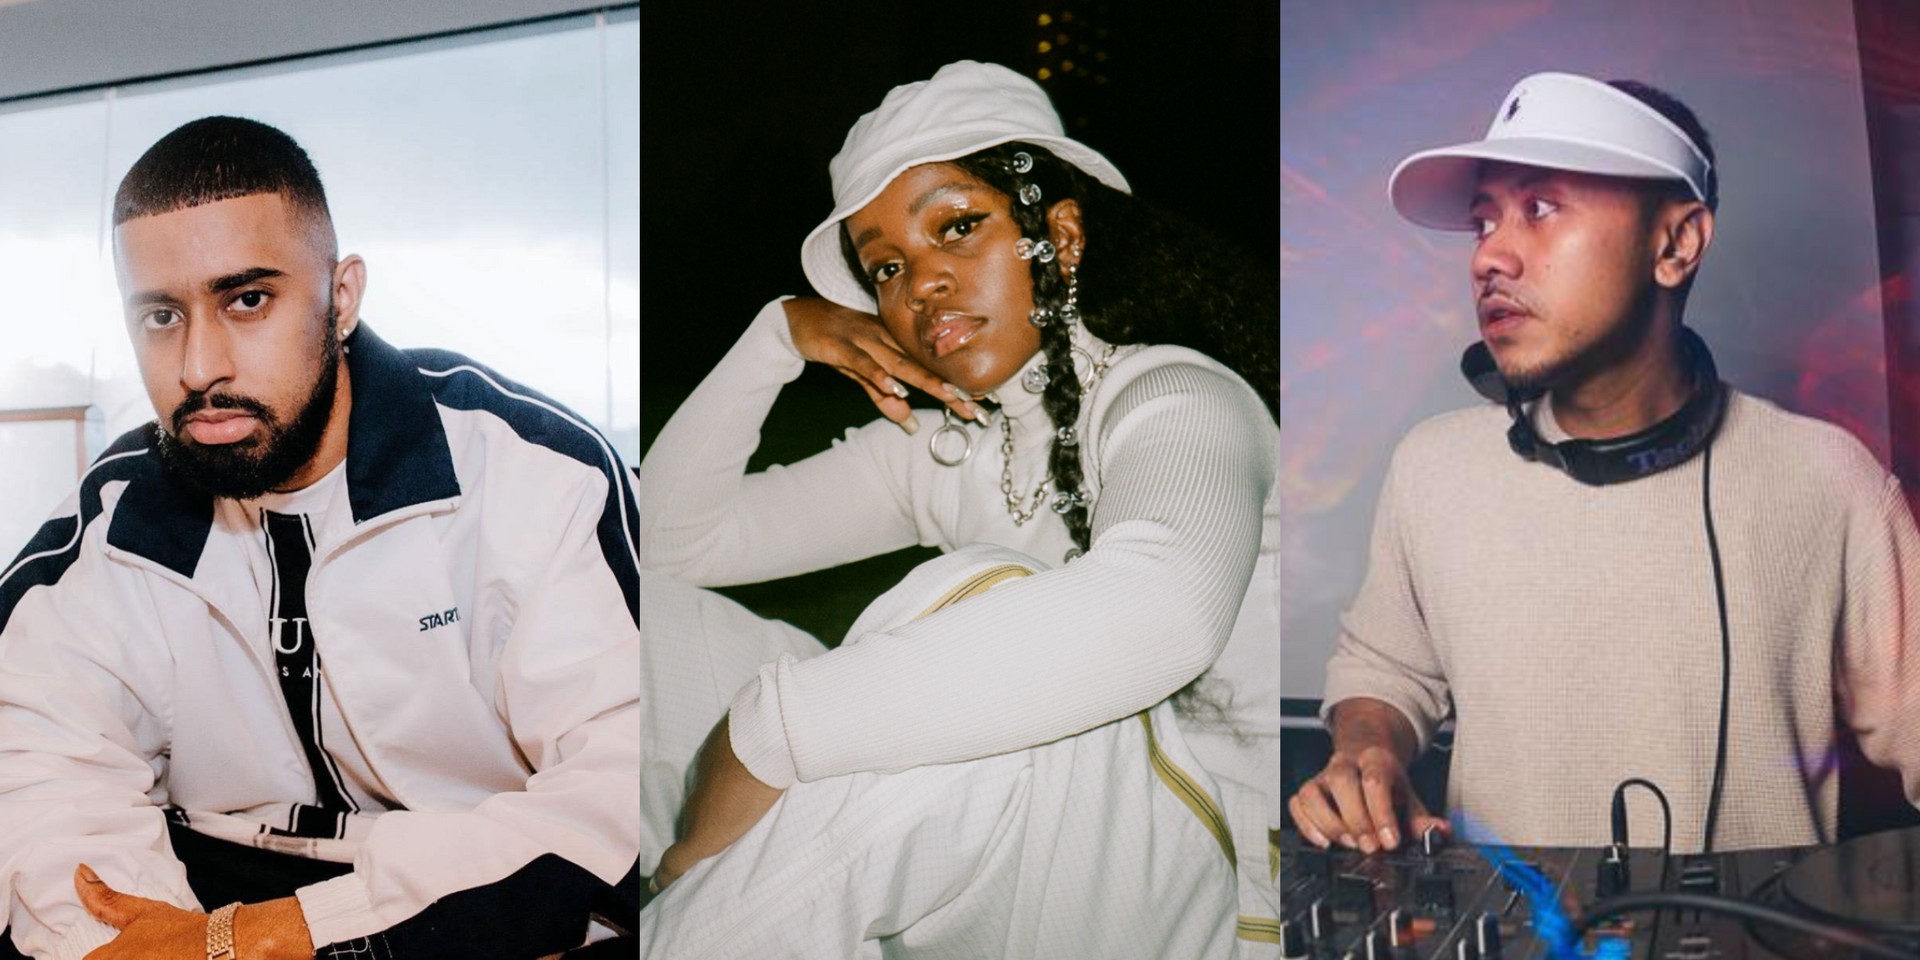 Tkay Maidza to perform in Singapore this September, PRAV and XG of .WAV(Y) to support